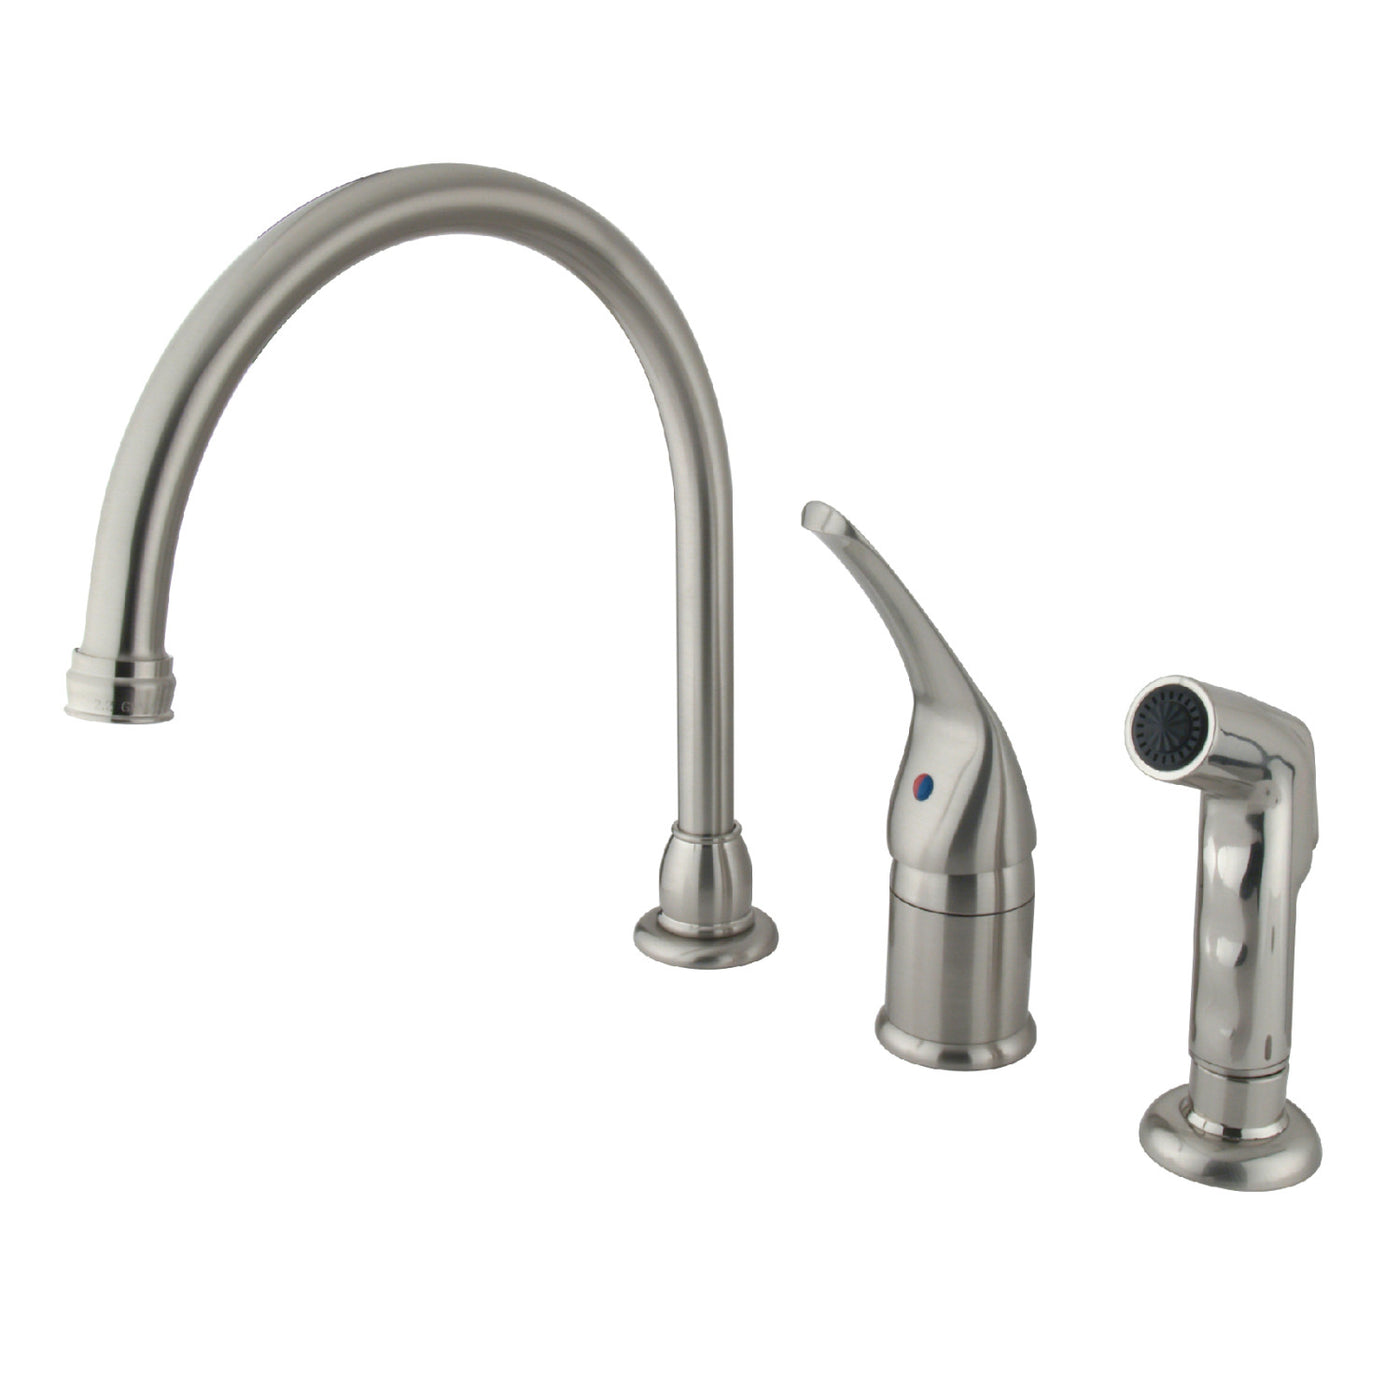 Elements of Design EB828 Single-Handle Widespread Kitchen Faucet Combo, Brushed Nickel